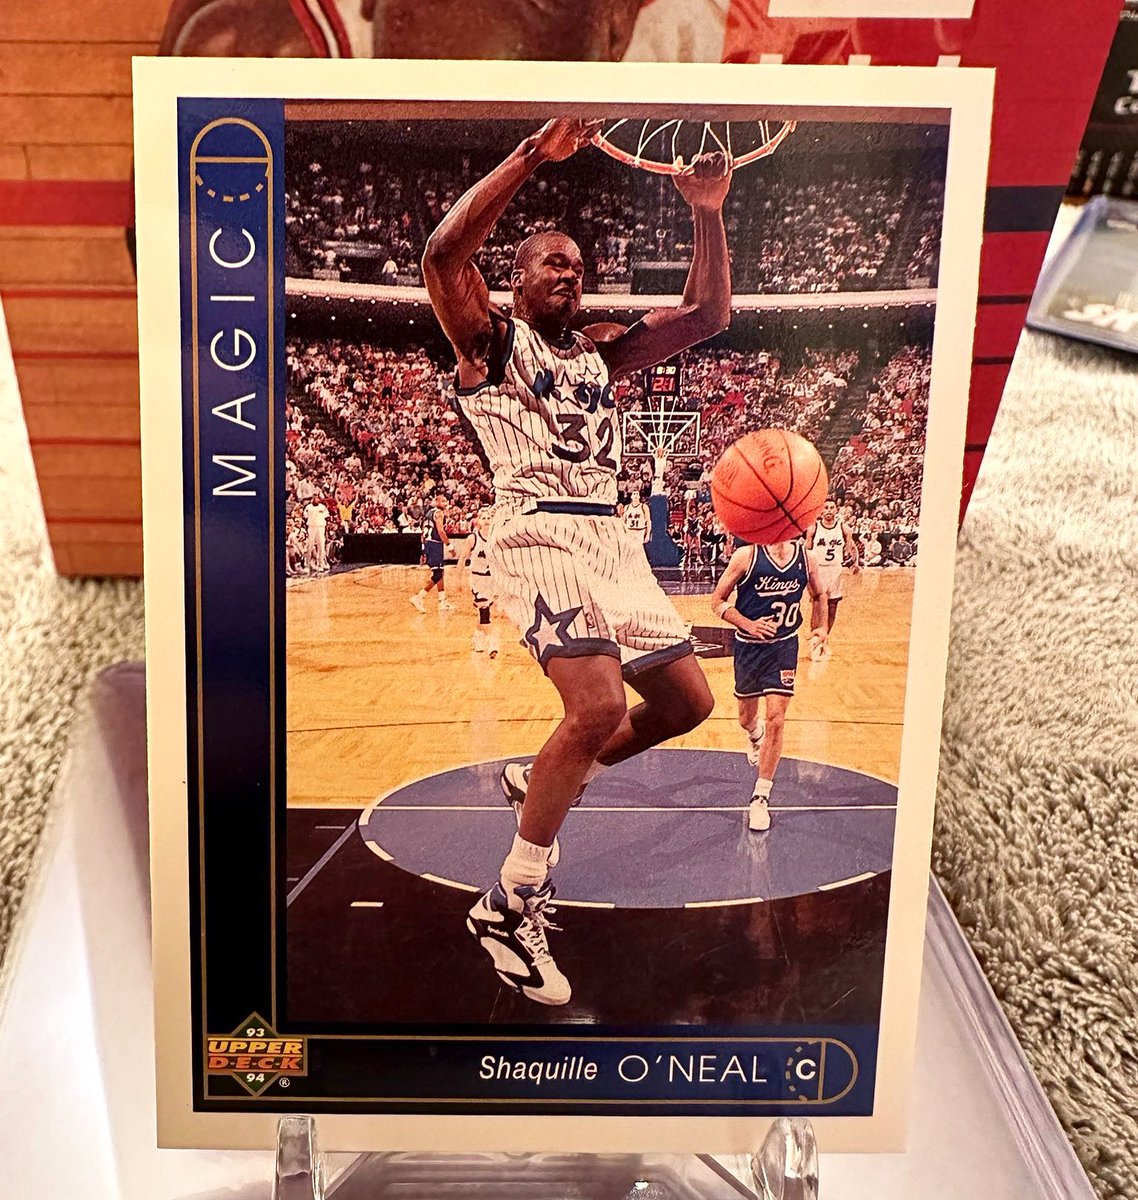 1993 Upper Deck Shaquille O’Neal. Love Shaq throwing it down! Pack fresh, sharp corners, and centered beautiful for $4. #junkwax #upperdeck #upperdeckbasketball #basketballcards #basketballcard #cards #card #sportscard #sportscards #shaq #shaquilleoneal #orlandomagic #shaqcards